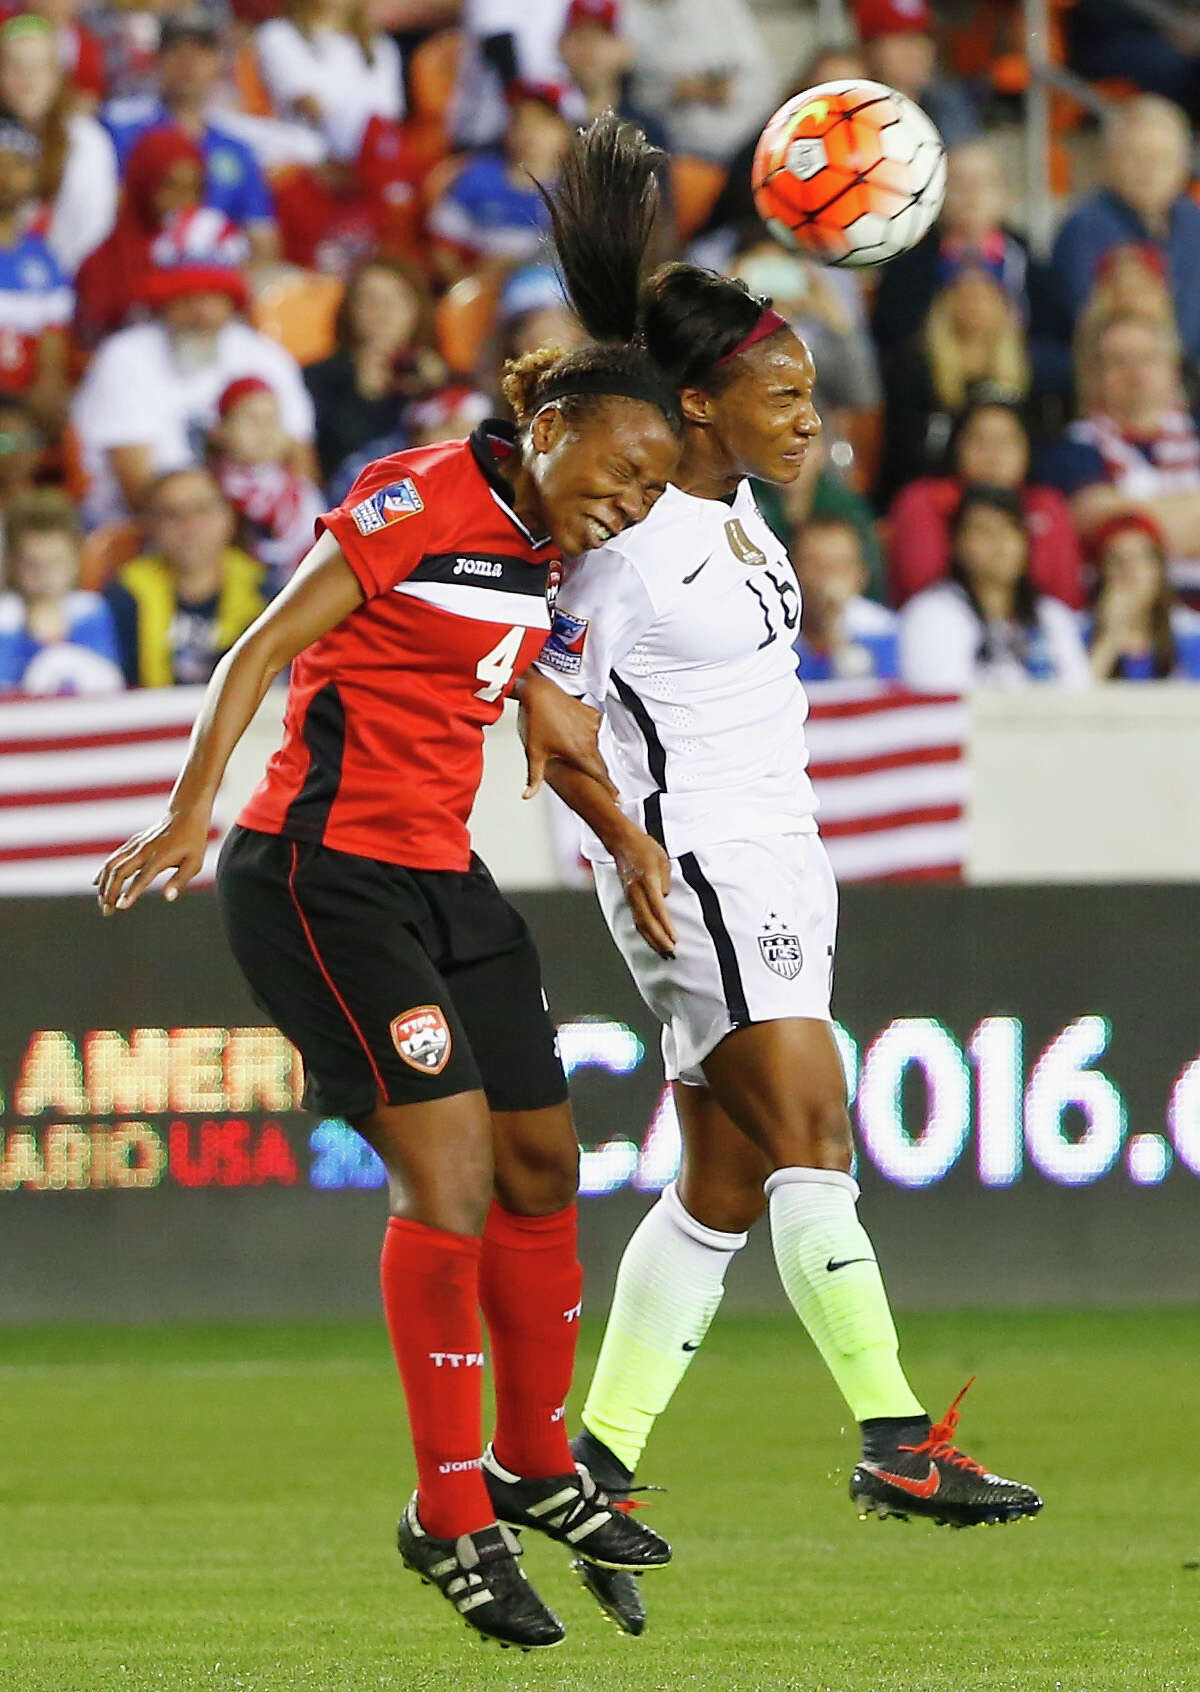 HOUSTON, TX - FEBRUARY 19: Crystal Dunn #16 of the United States battles for the ball with Danielle Blair #4 of Trinidad and Tobago during their Semifinal of the 2016 CONCACAF Women's Olympic Qualifying at BBVA Compass Stadium on February 19, 2016 in Houston, Texas.